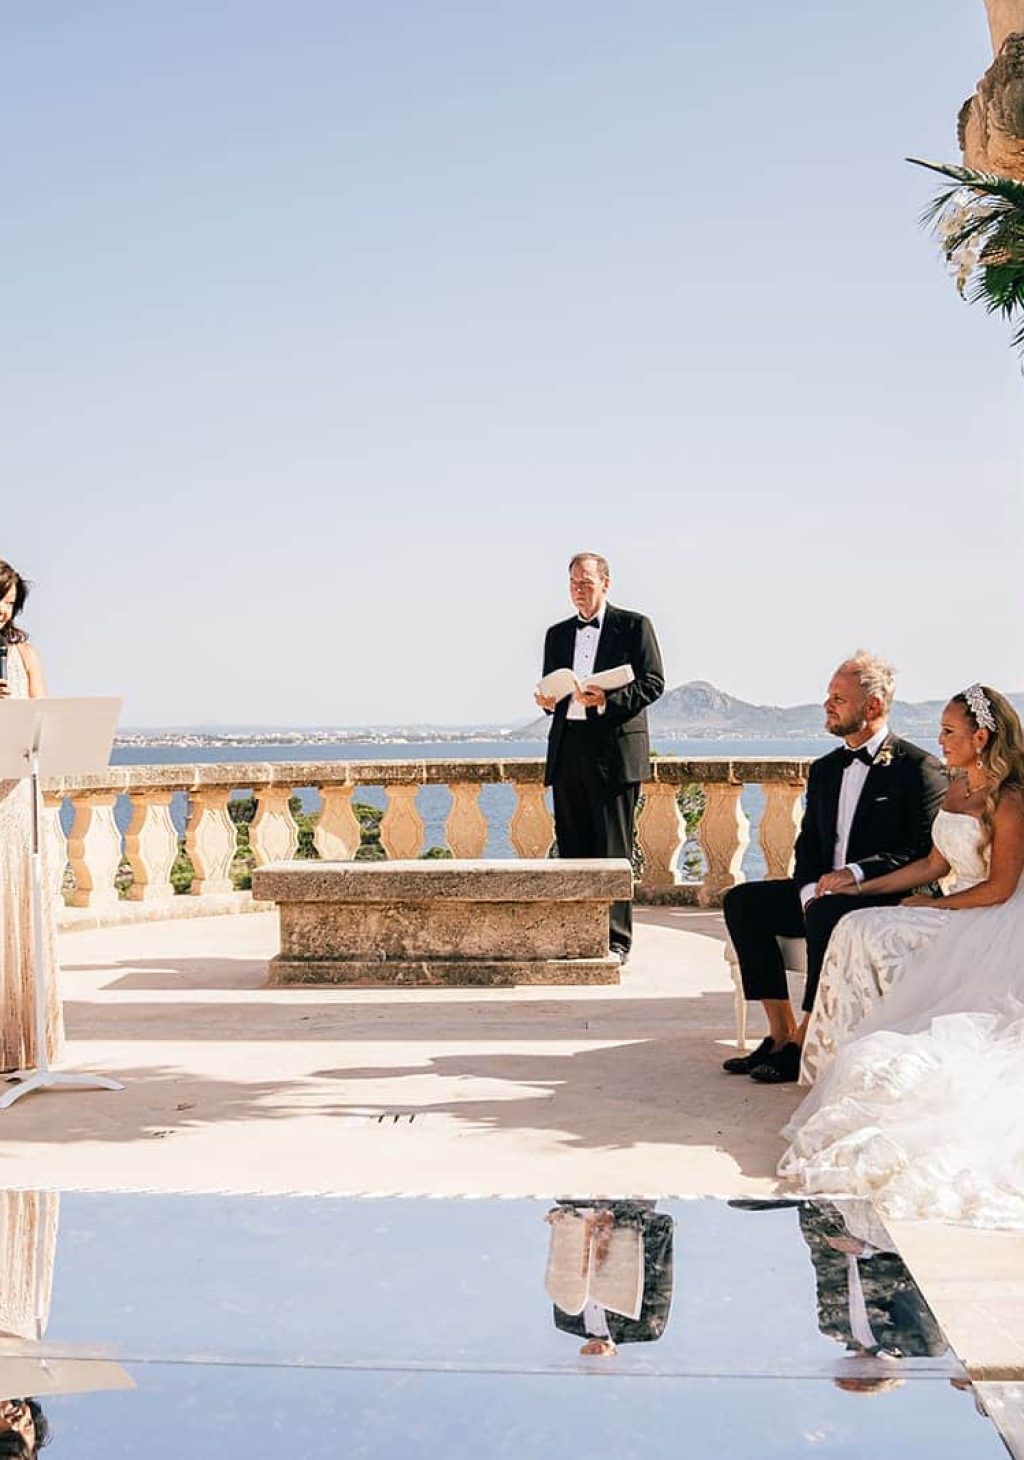 weddings and events in Mallorca. Get to know La Fortaleza.